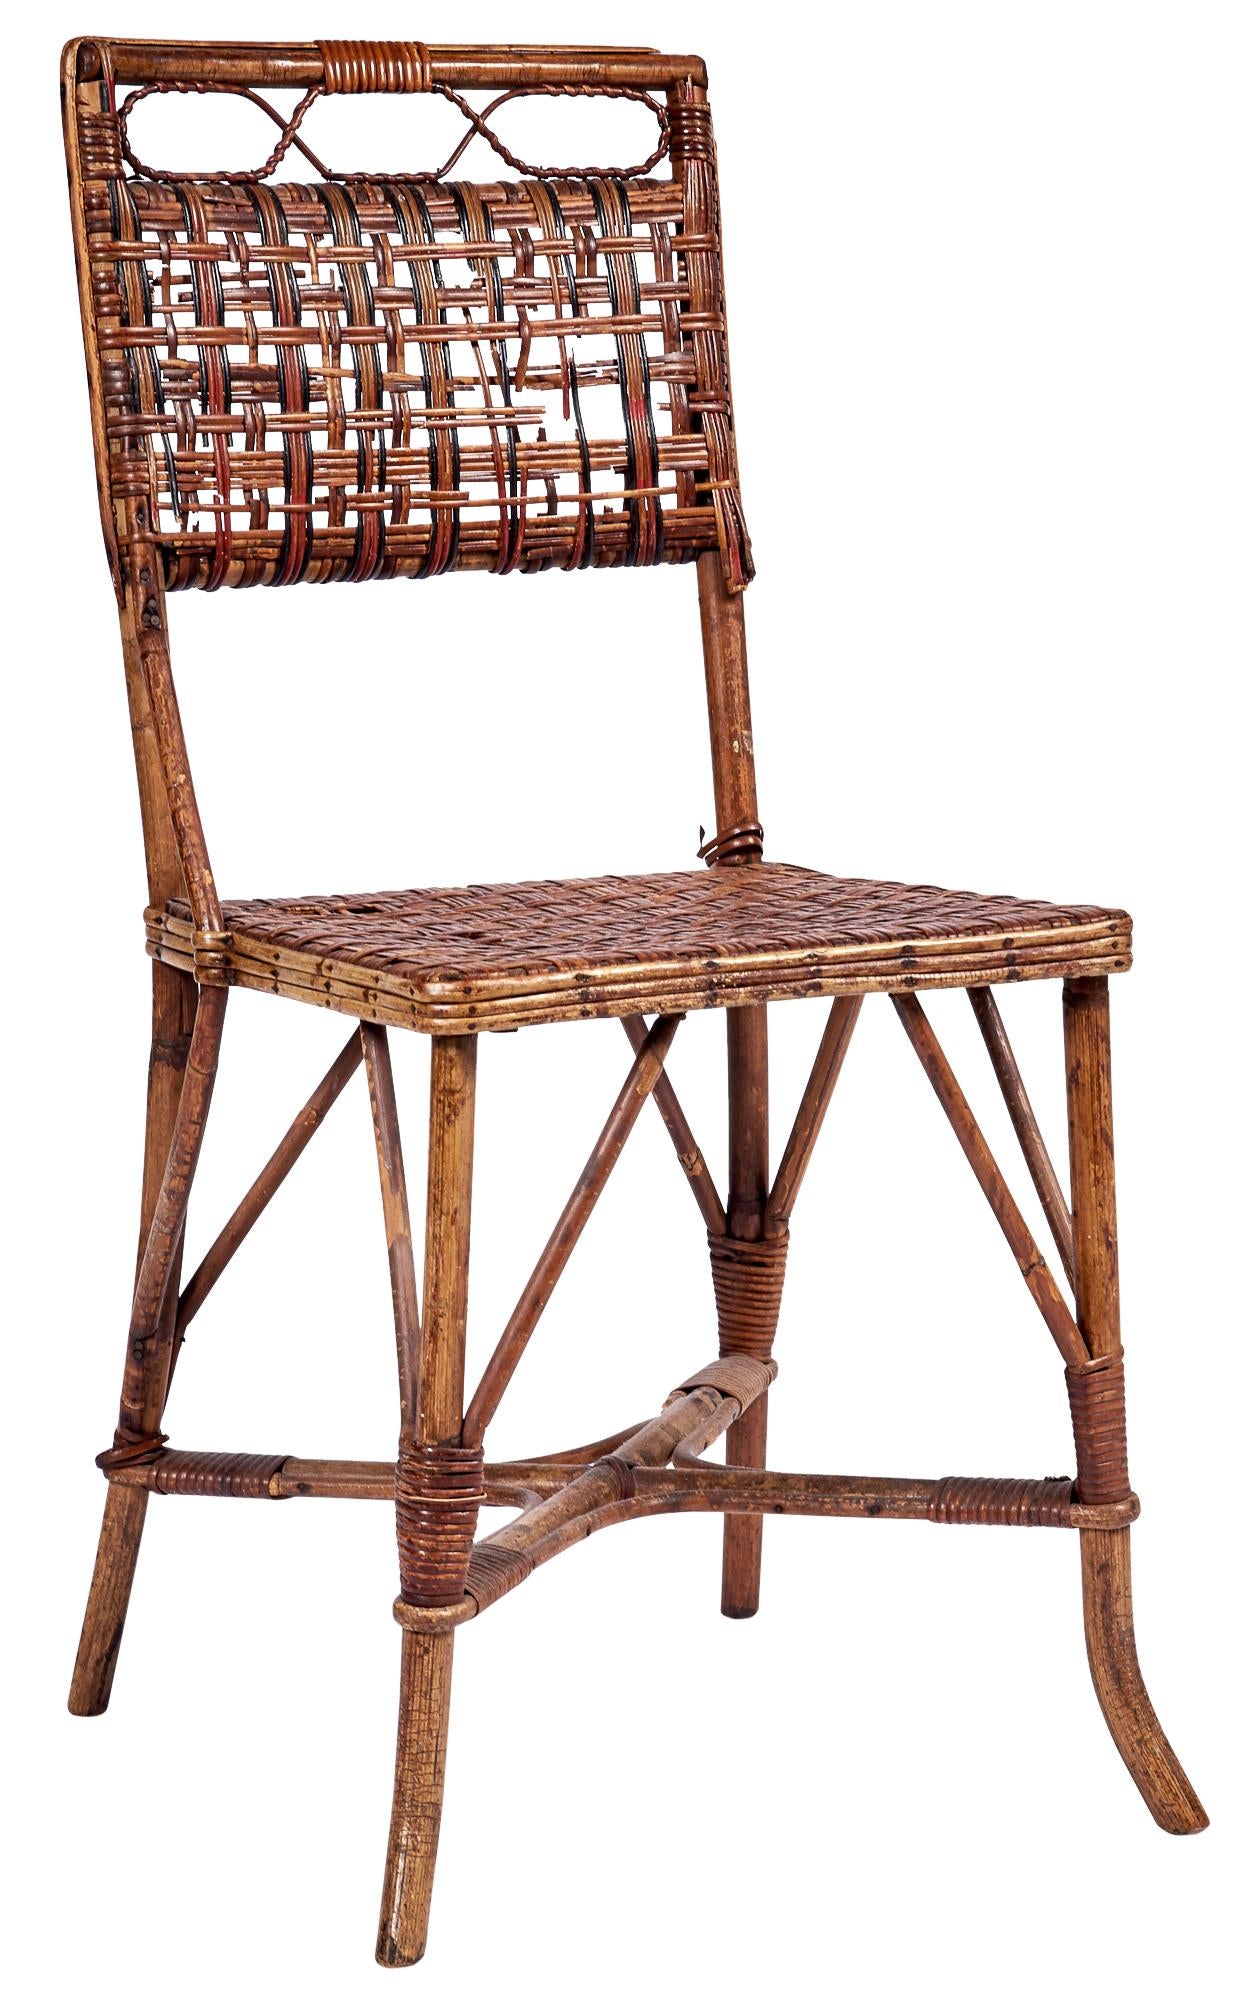 [Casablanca] Wicker Chair from the “Casablanca” Set of Rick’s Cafe